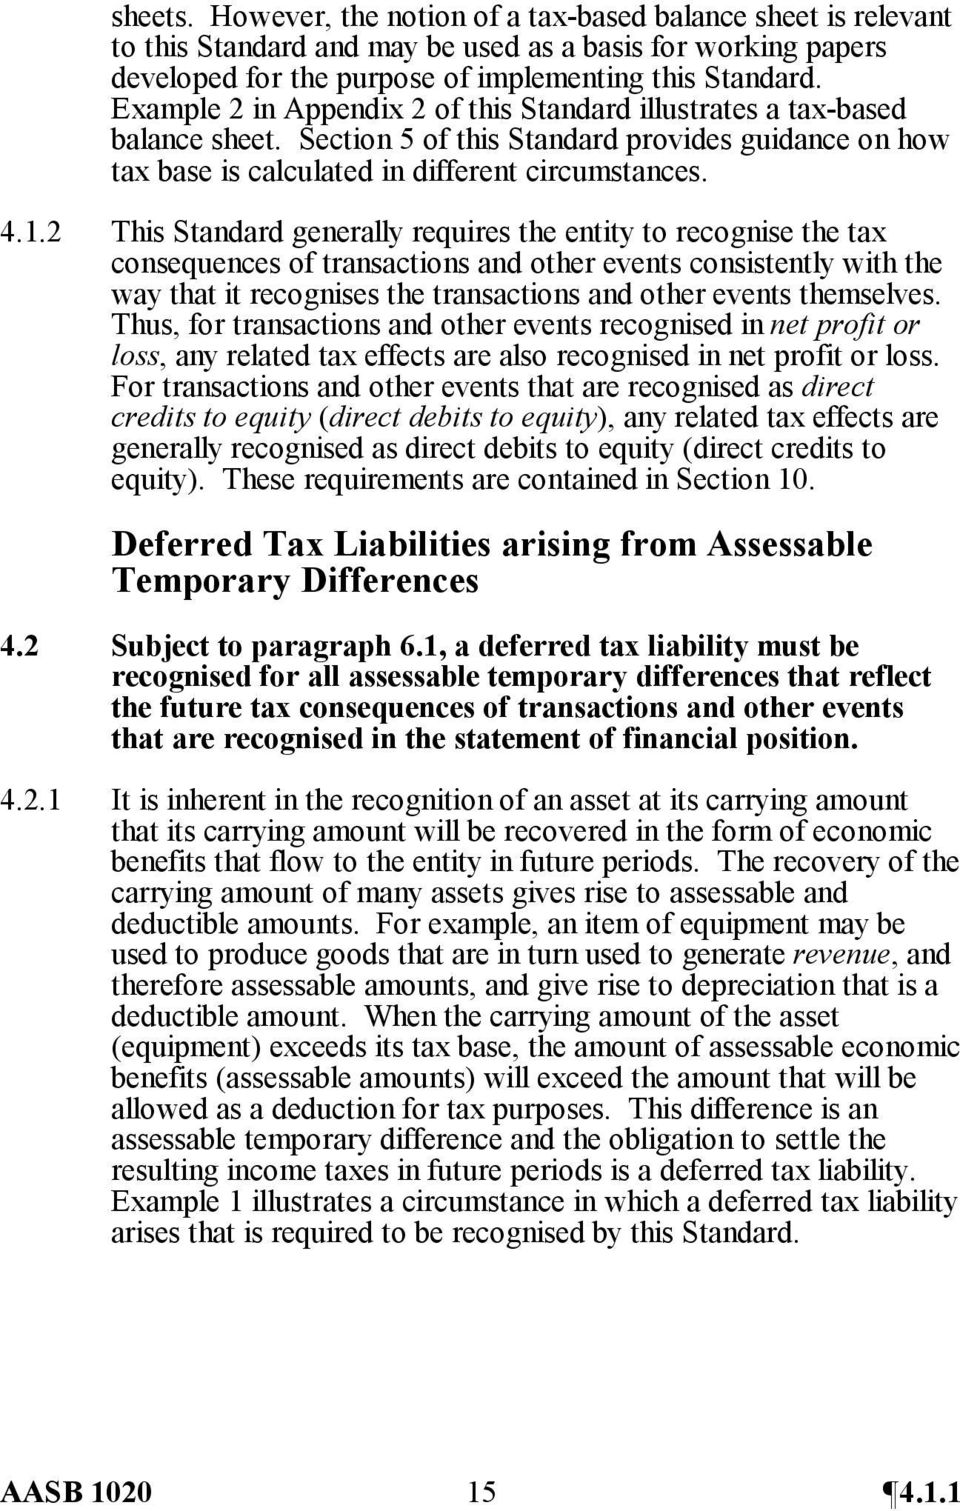 2 This Standard generally requires the entity to recognise the tax consequences of transactions and other events consistently with the way that it recognises the transactions and other events